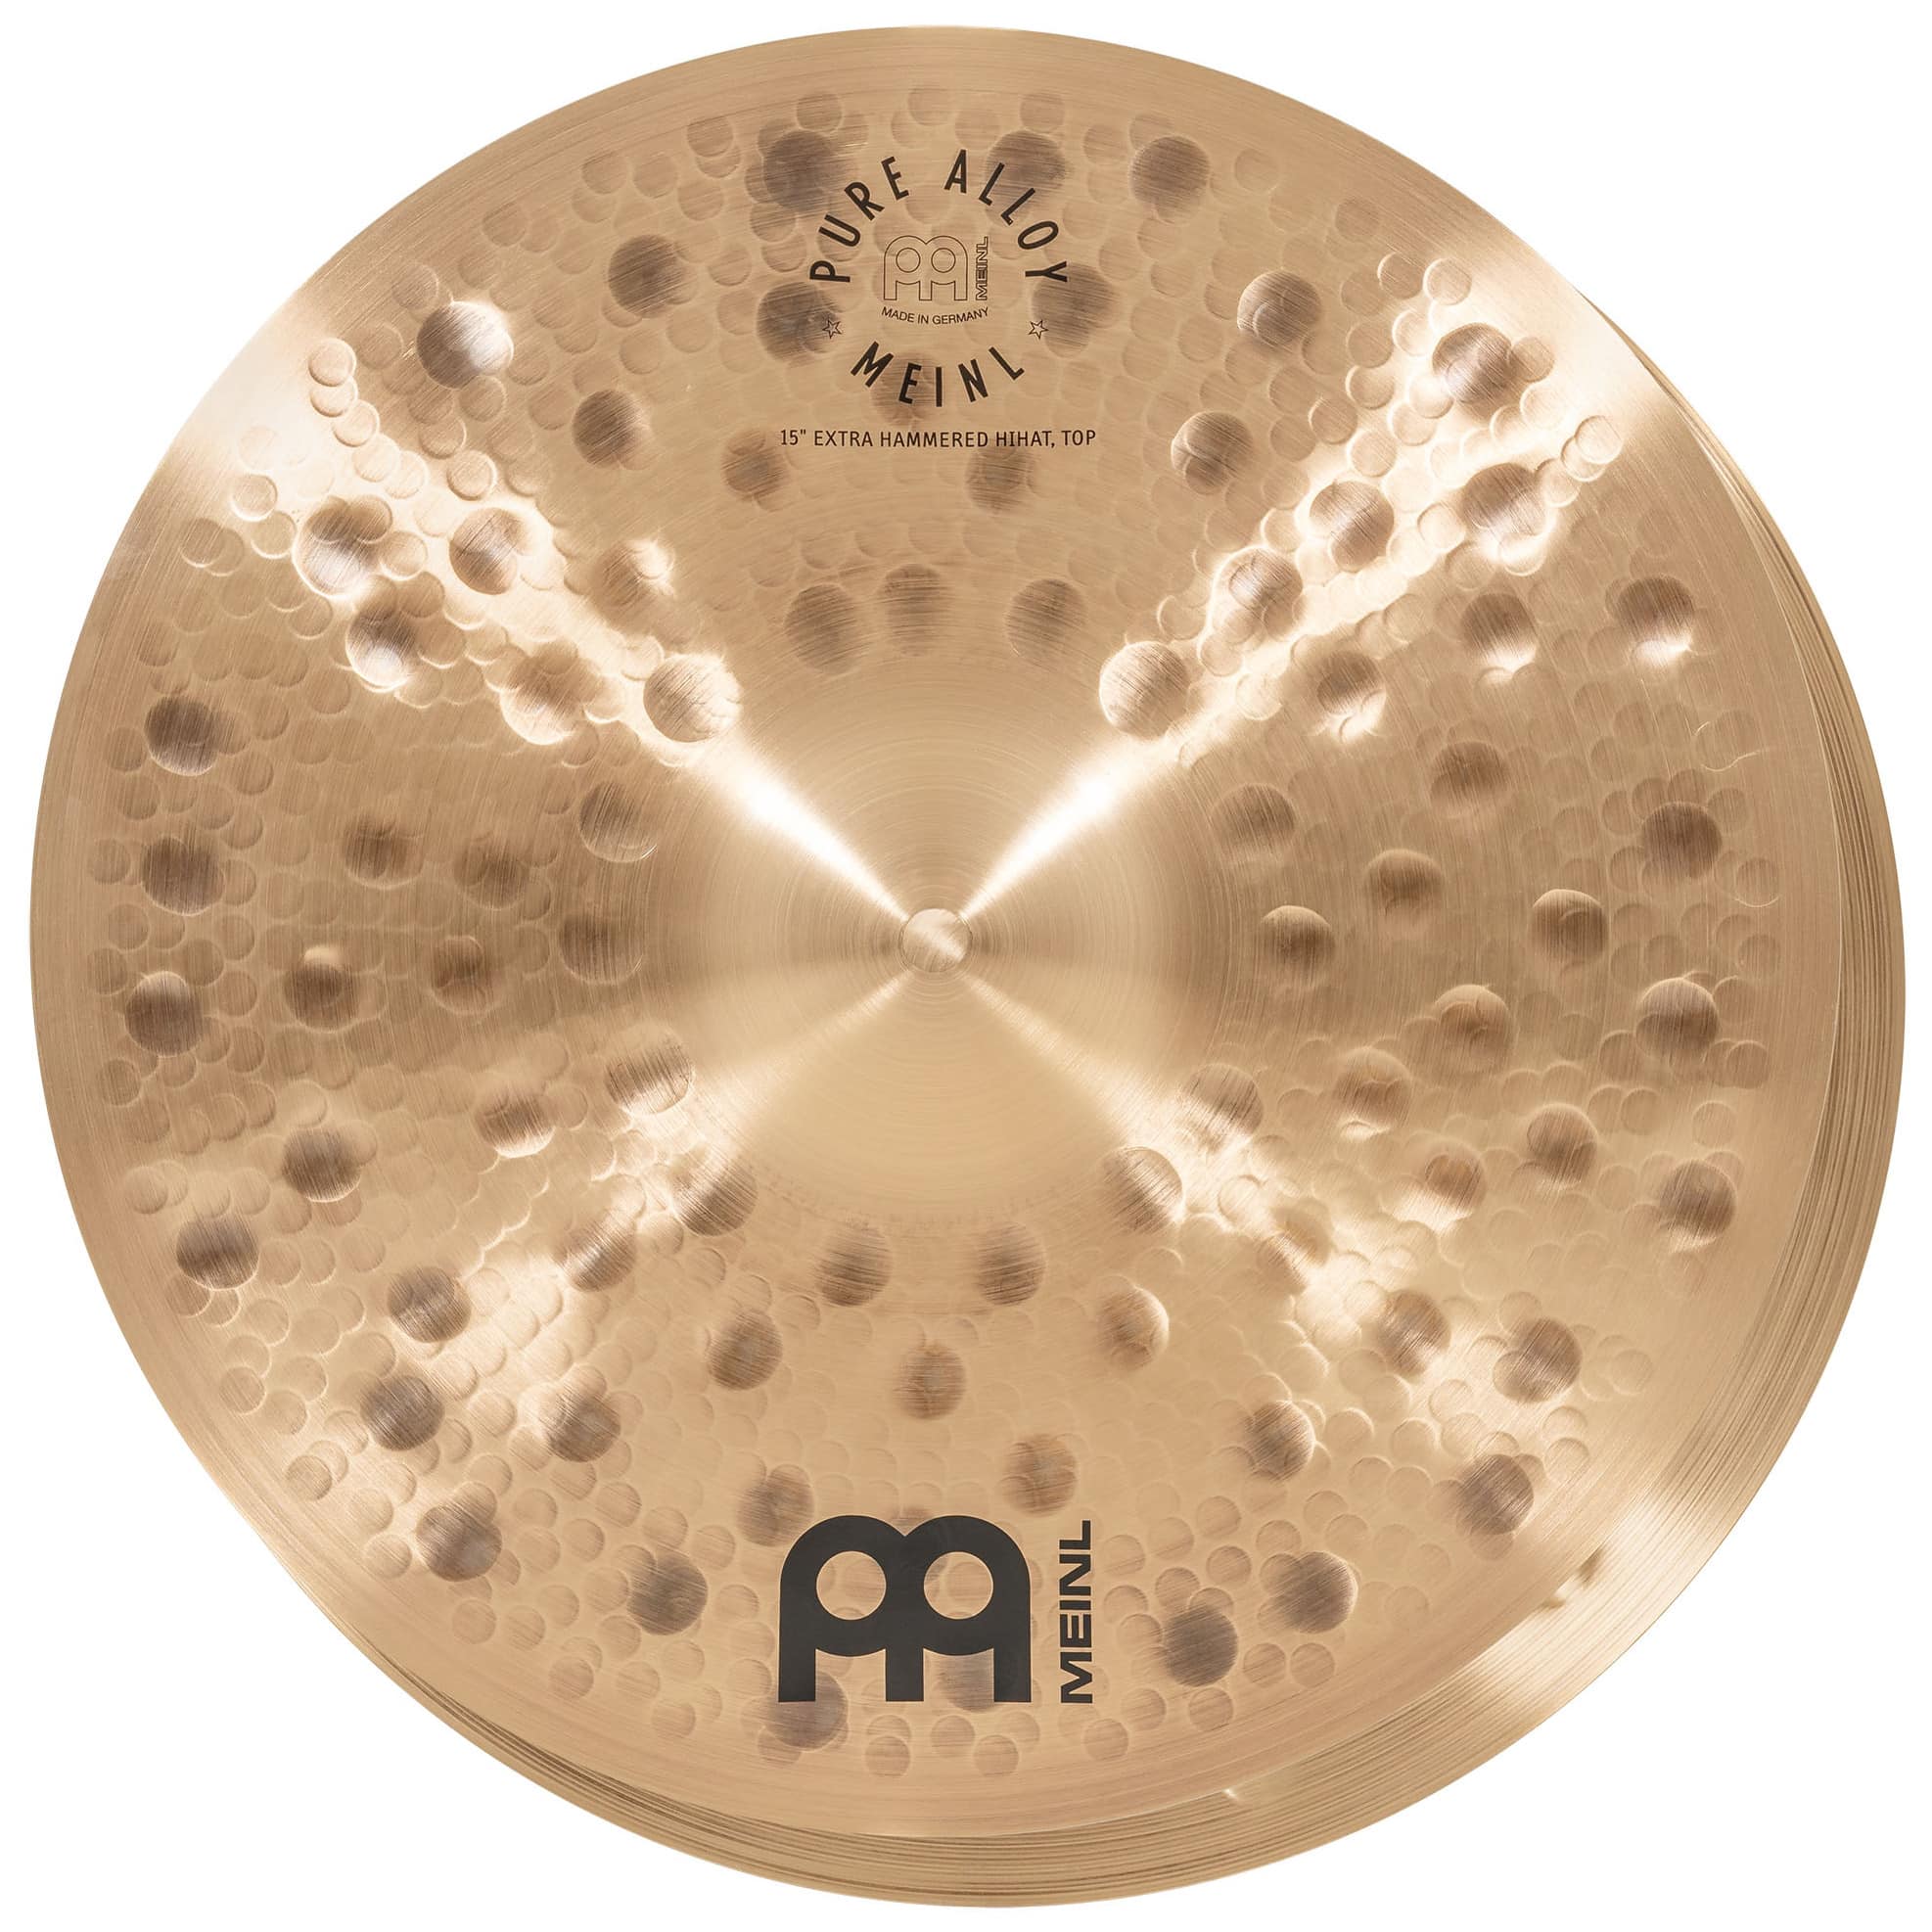 Meinl Cymbals PA15EHH - 15" Pure Alloy Extra Hammered Hihat